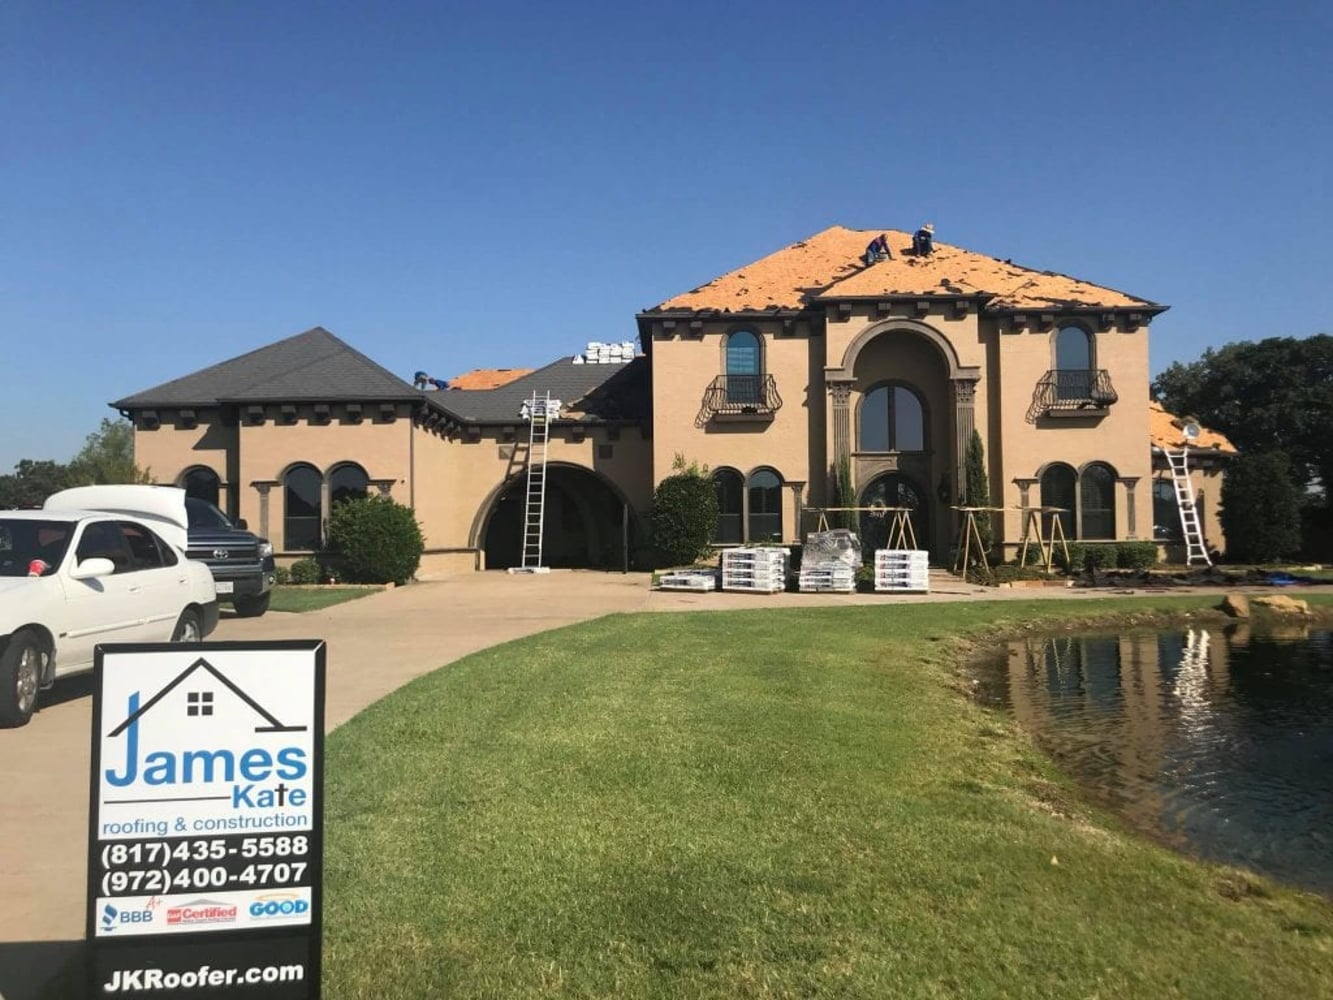 James Kate Construction: Roofing, Painting & Windows - Aubrey, TX, US, flat roof specialists near me